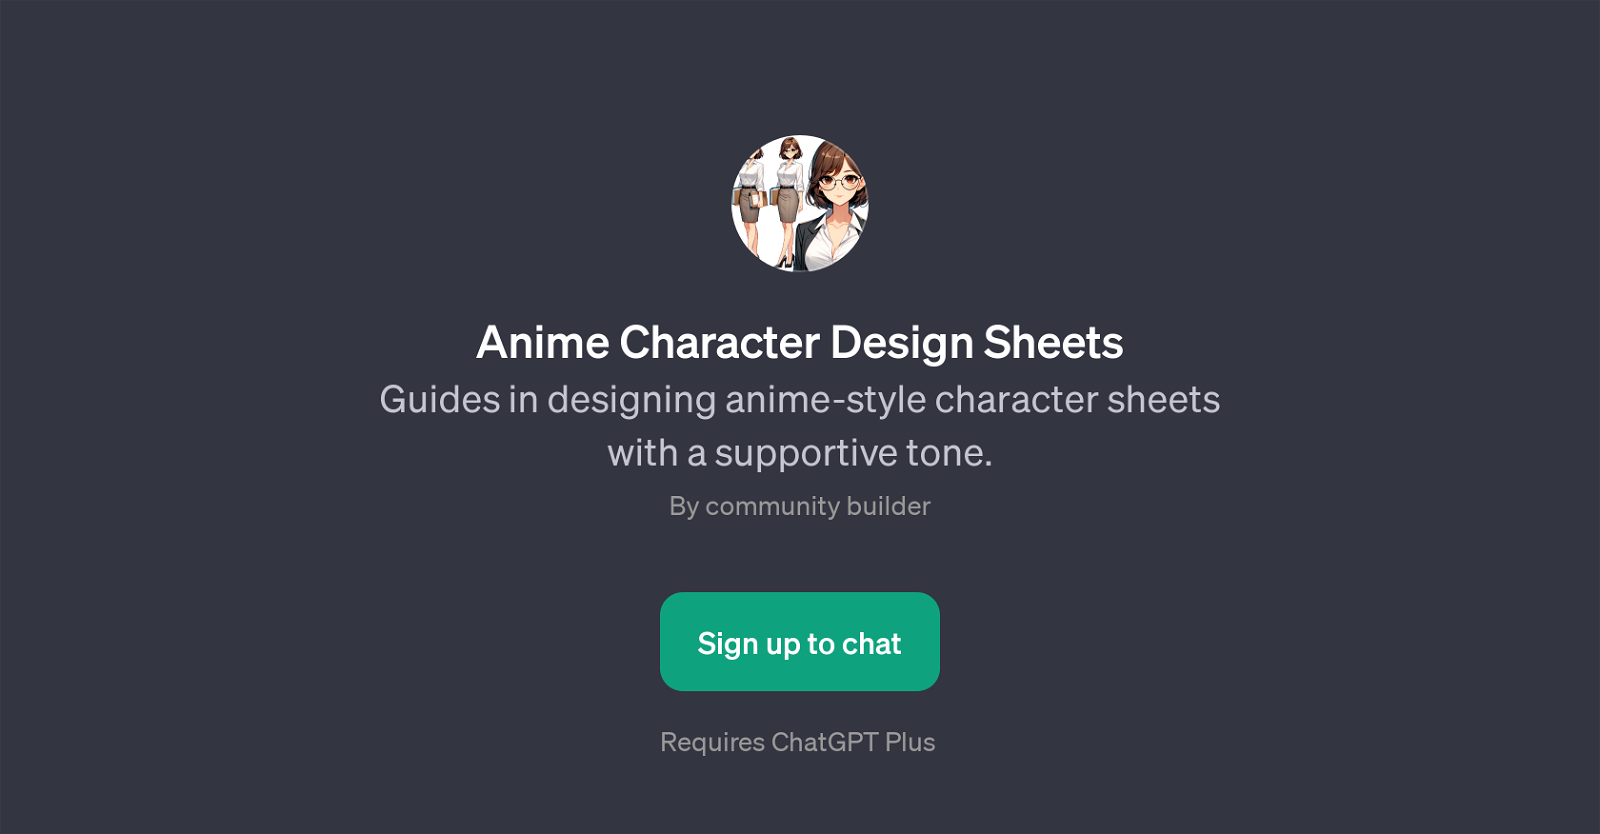 Anime Character Design Sheets website